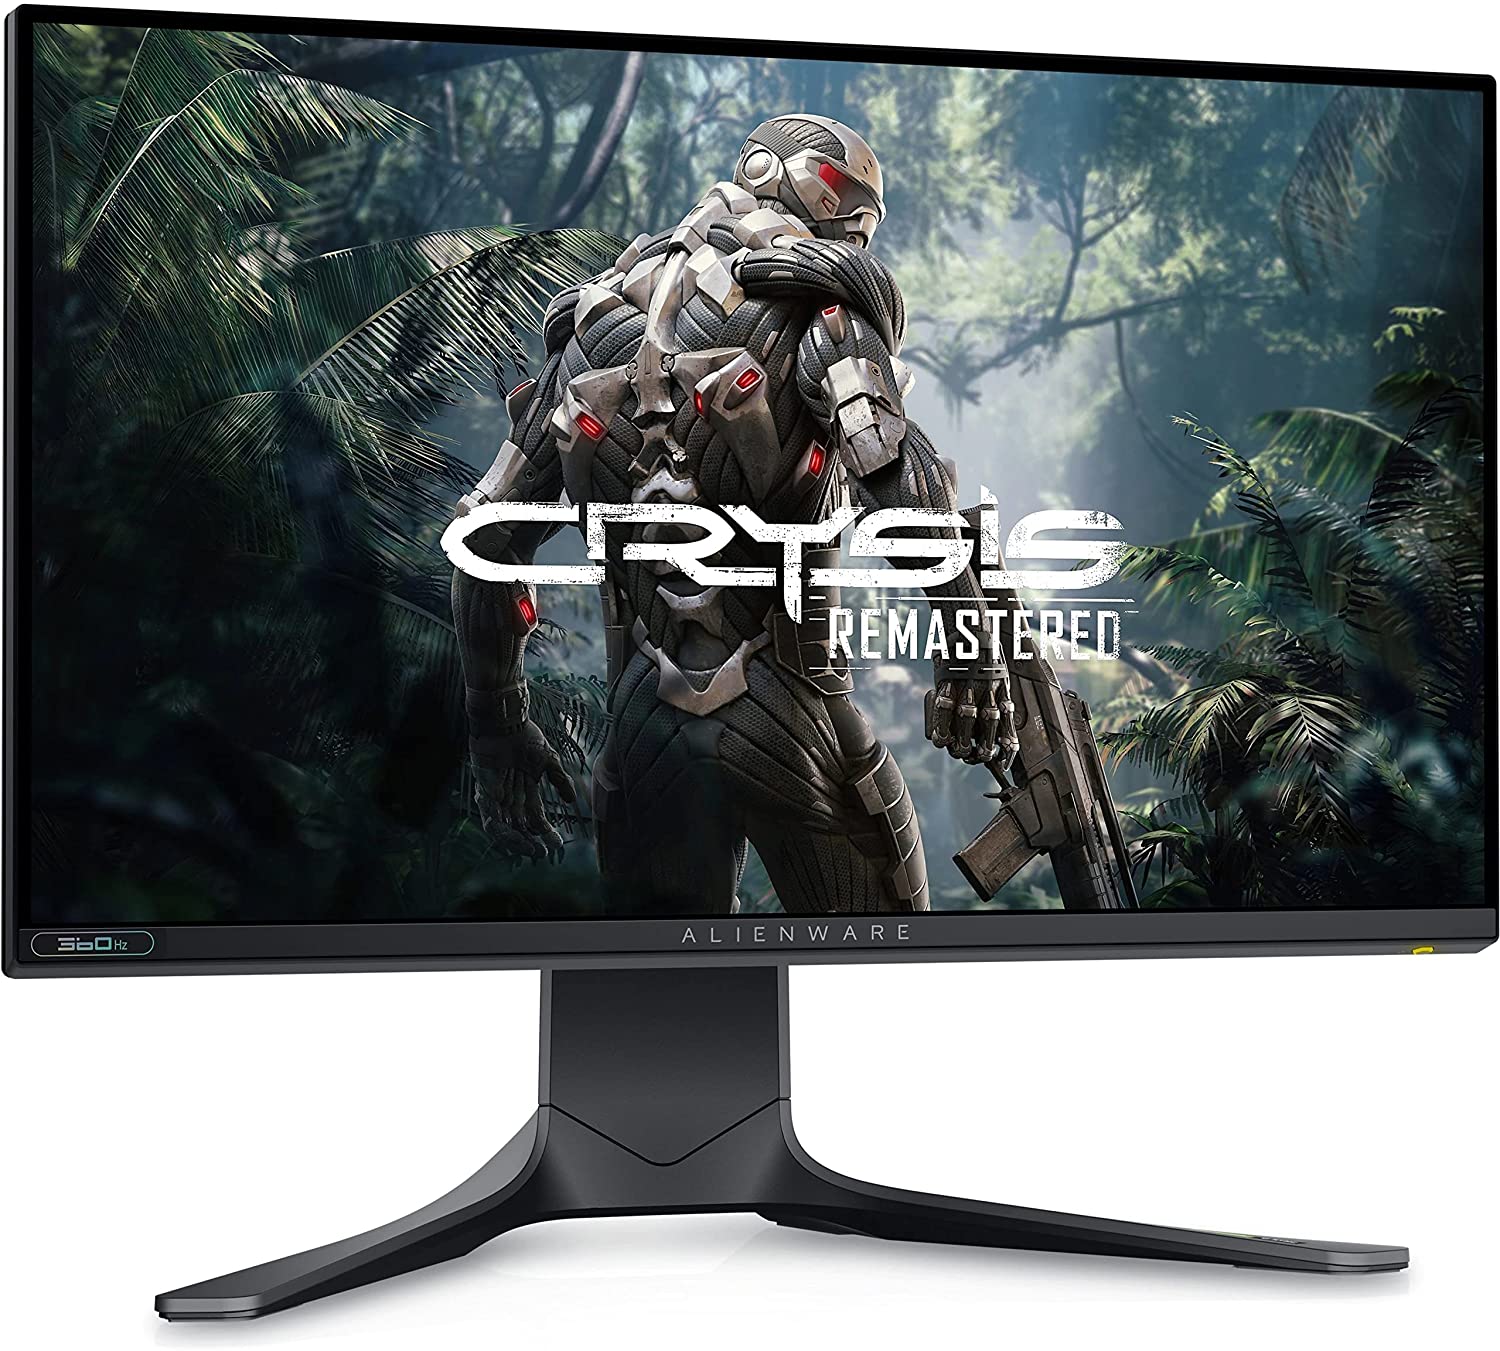 Alienware 360Hz Gaming Monitor 24.5 Inch FHD (Full HD 1920 x 1080p), NVIDIA G-SYNC Certified